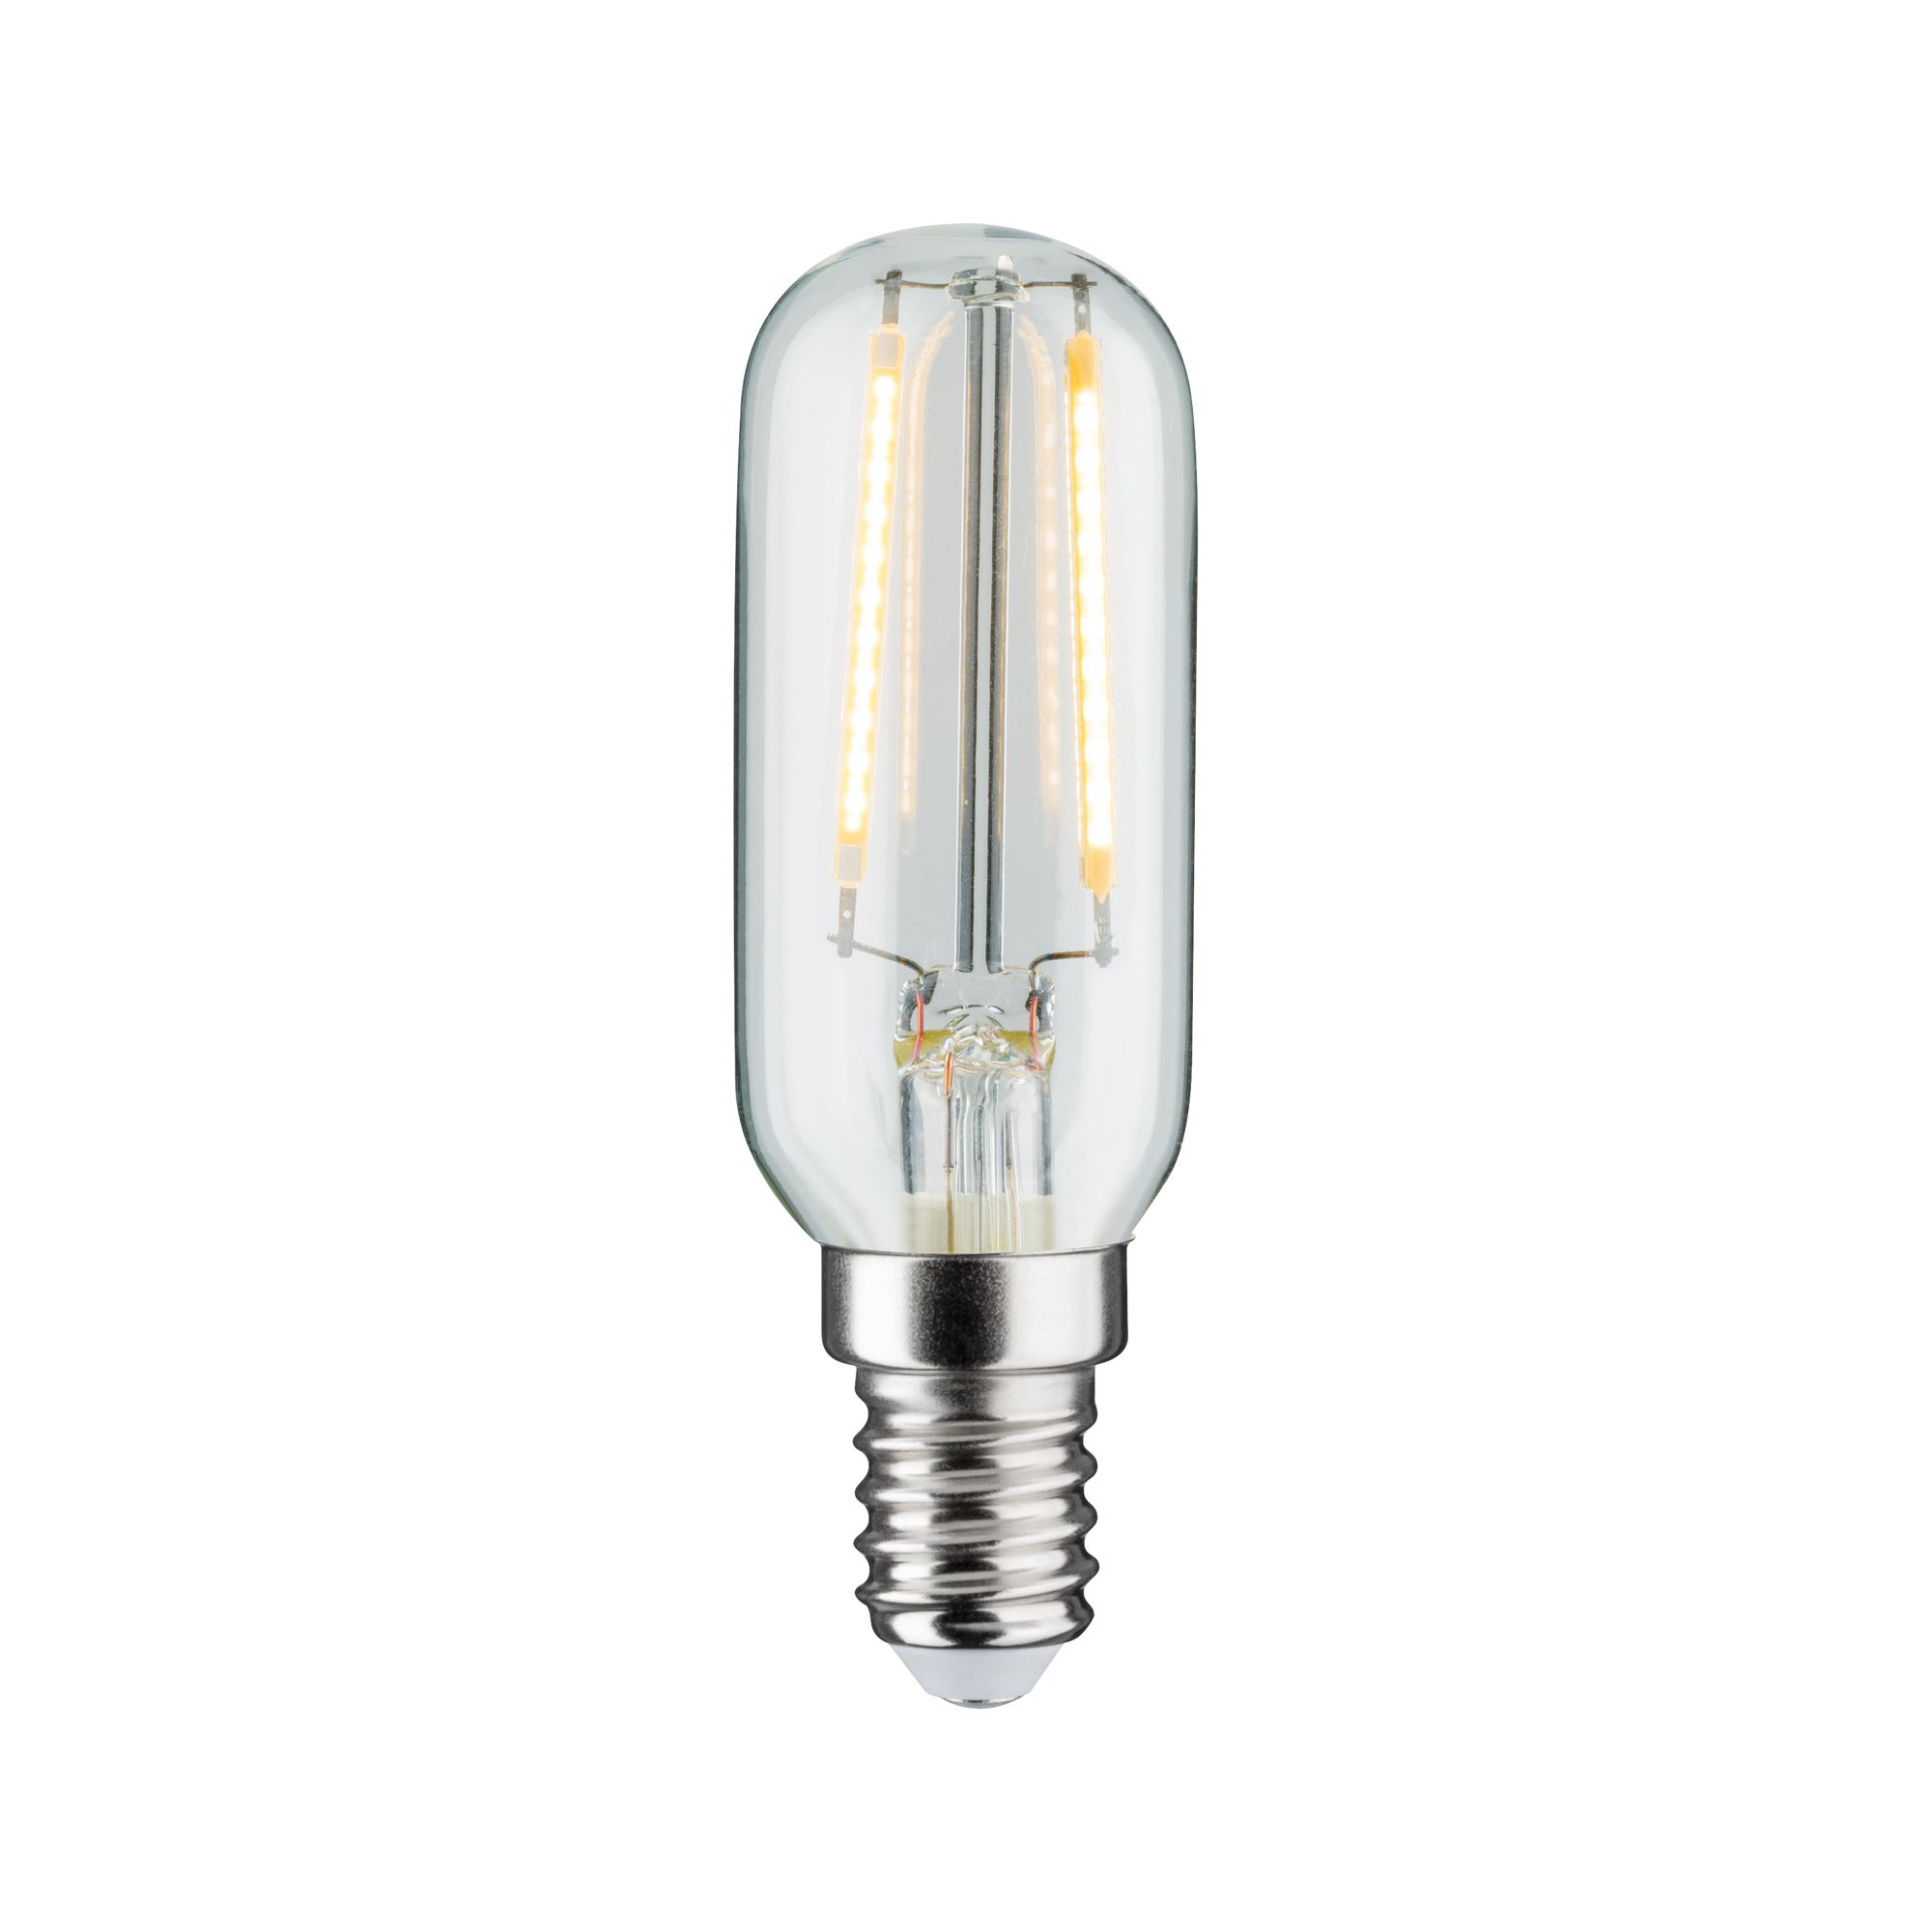 LED-Röhrenlampe E14 2,8W (25W) 250 lm warmweiß + product picture